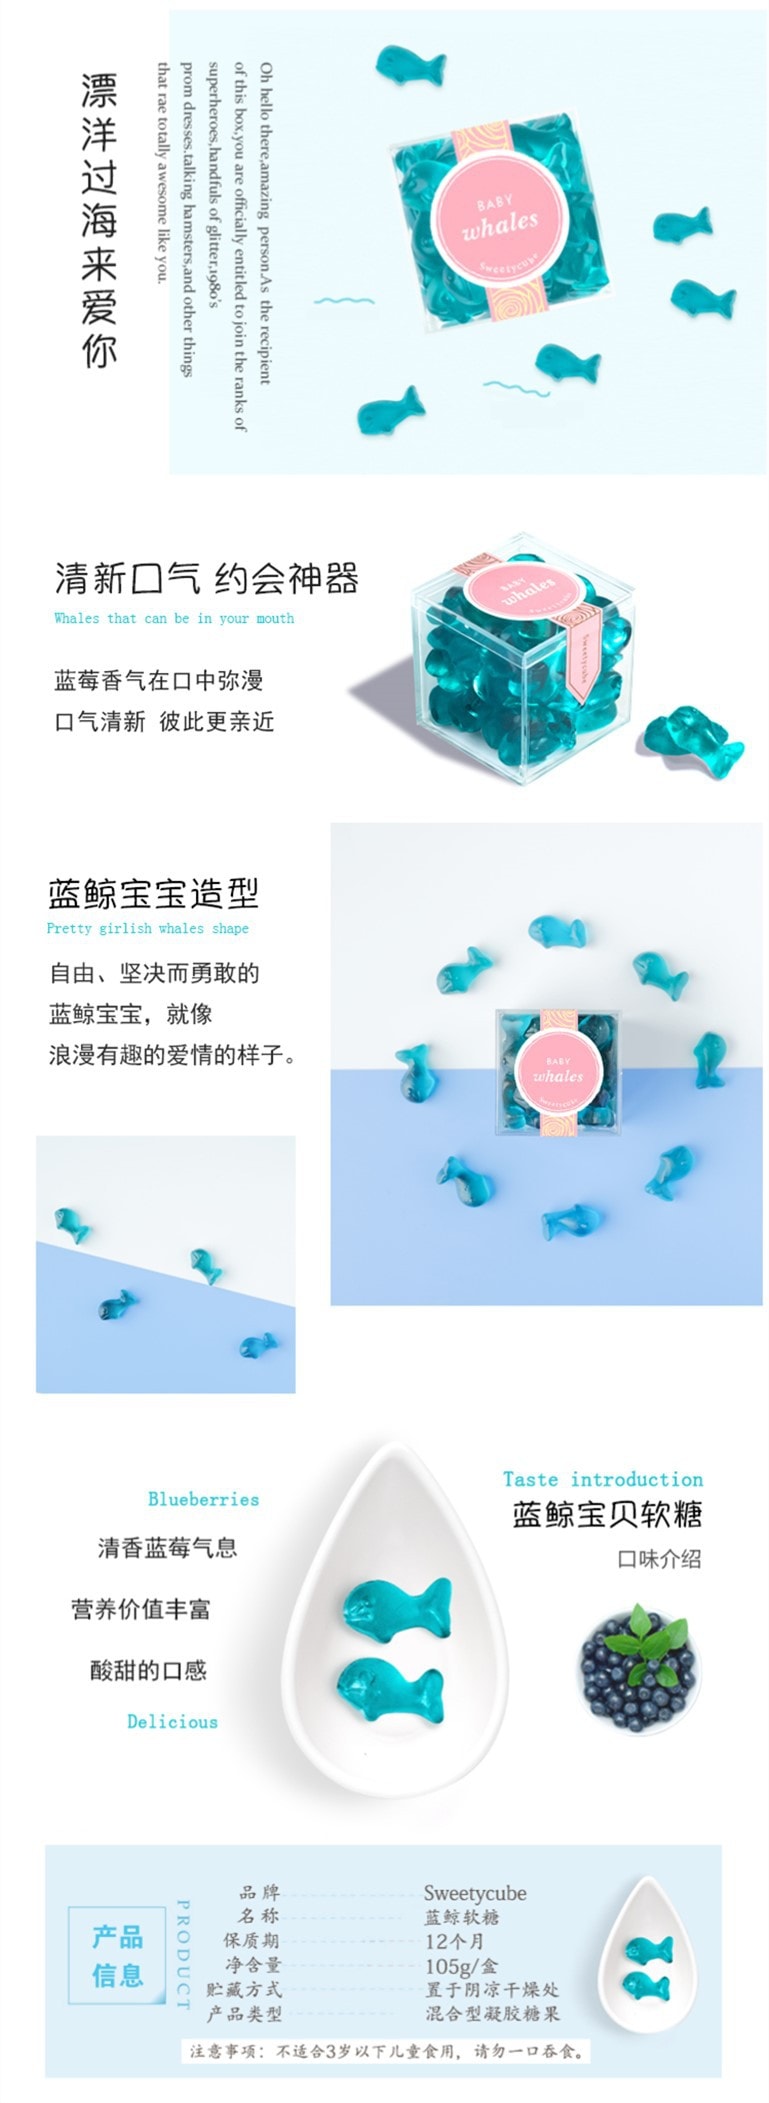 SWEETYCUBE blue whale fruit jelly 105g